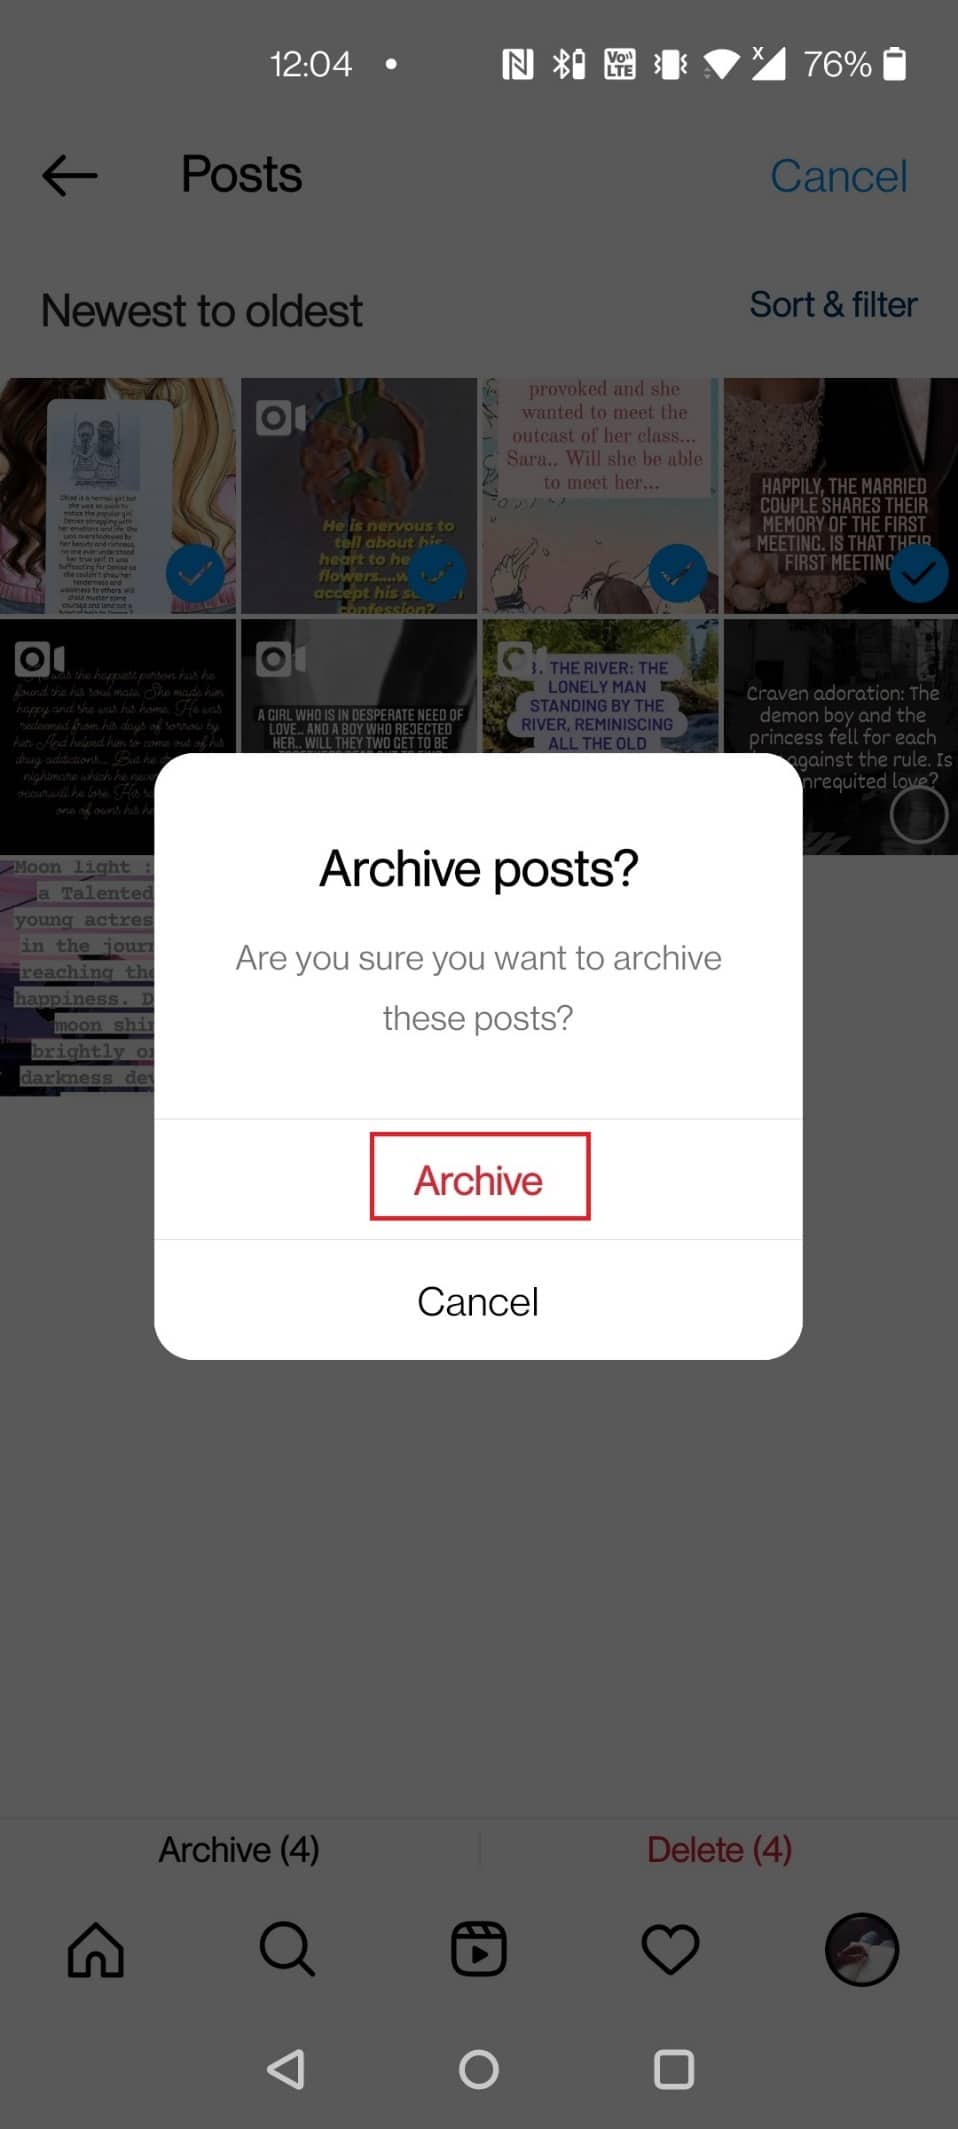 tap on Archive in the pop-up